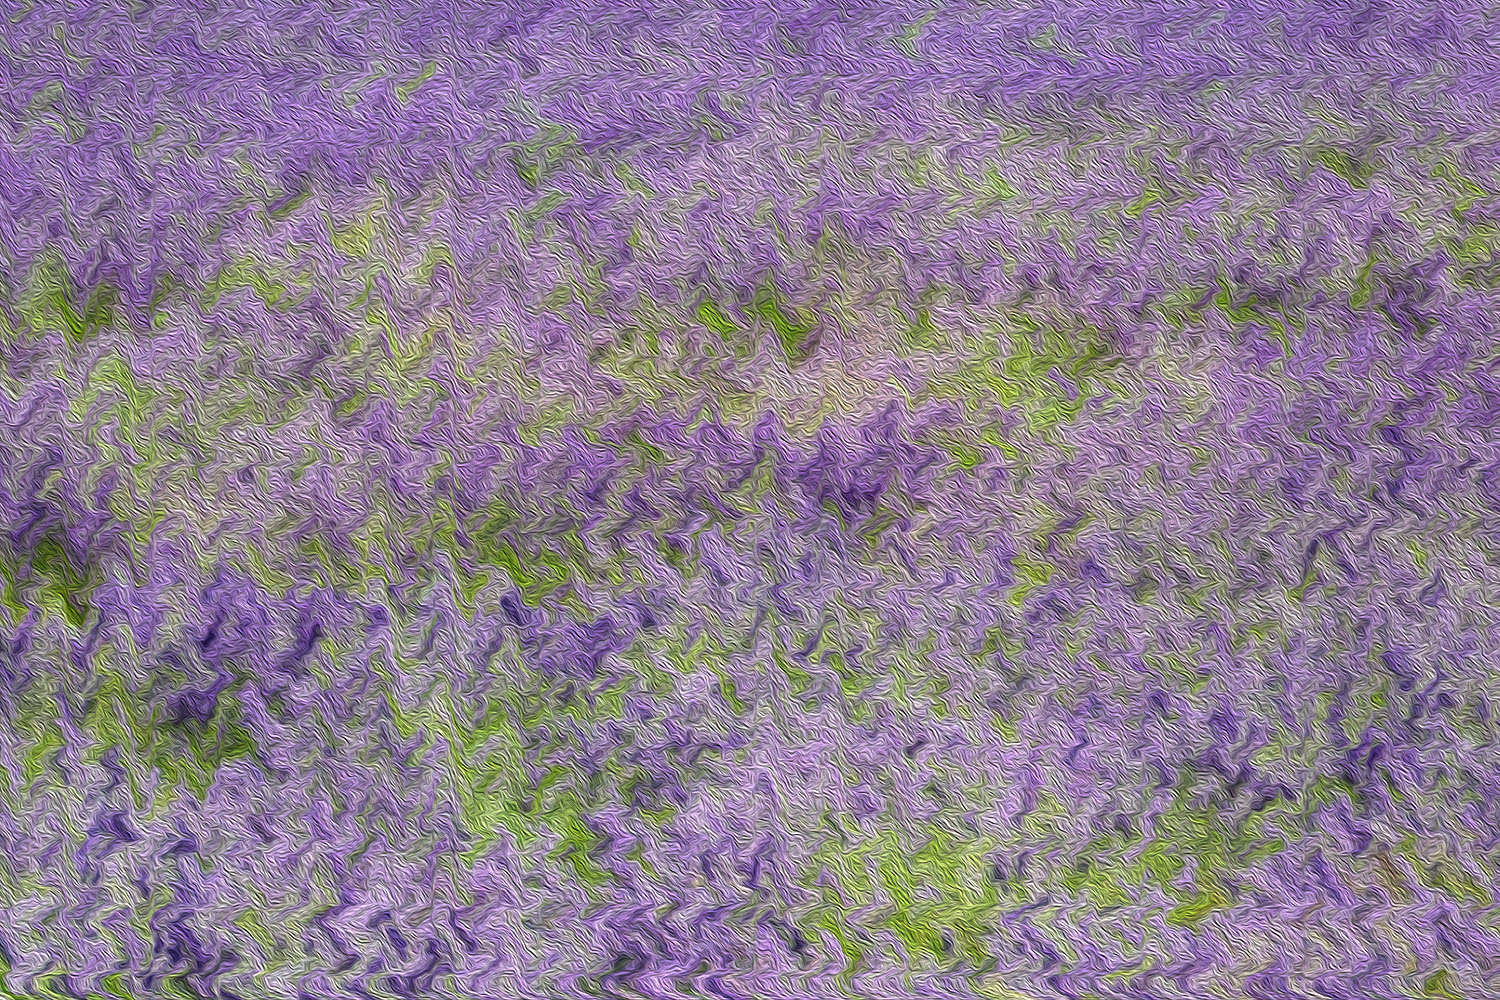 An abstract version of the 'Plateau de Valensole' lavender.